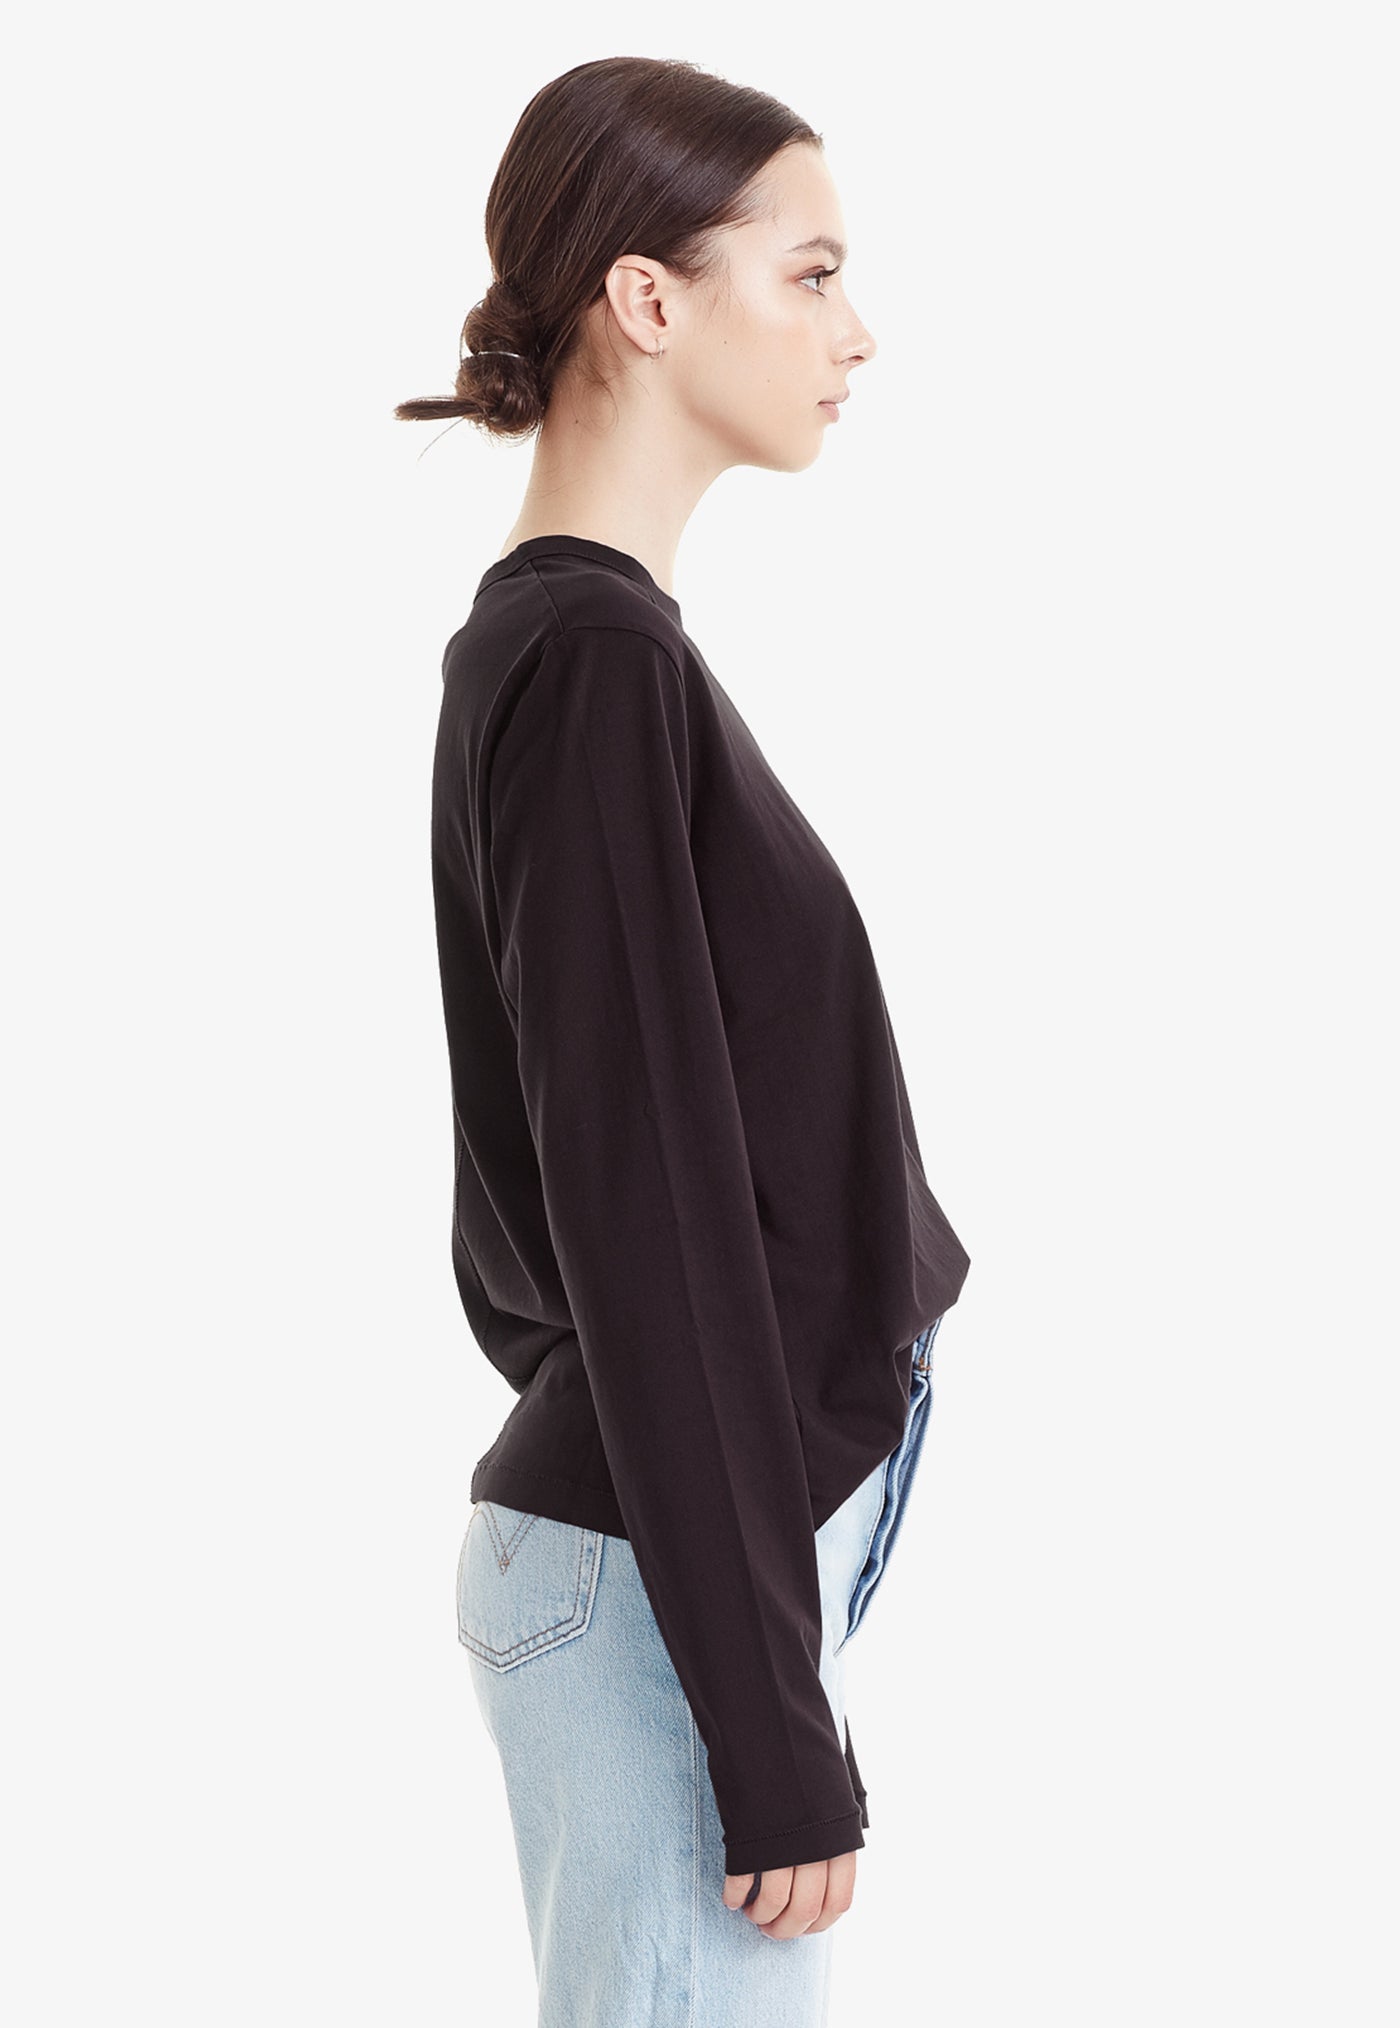 Commoners - Organic Cotton Classic Long Sleeve Tee - Black sold by Angel Divine